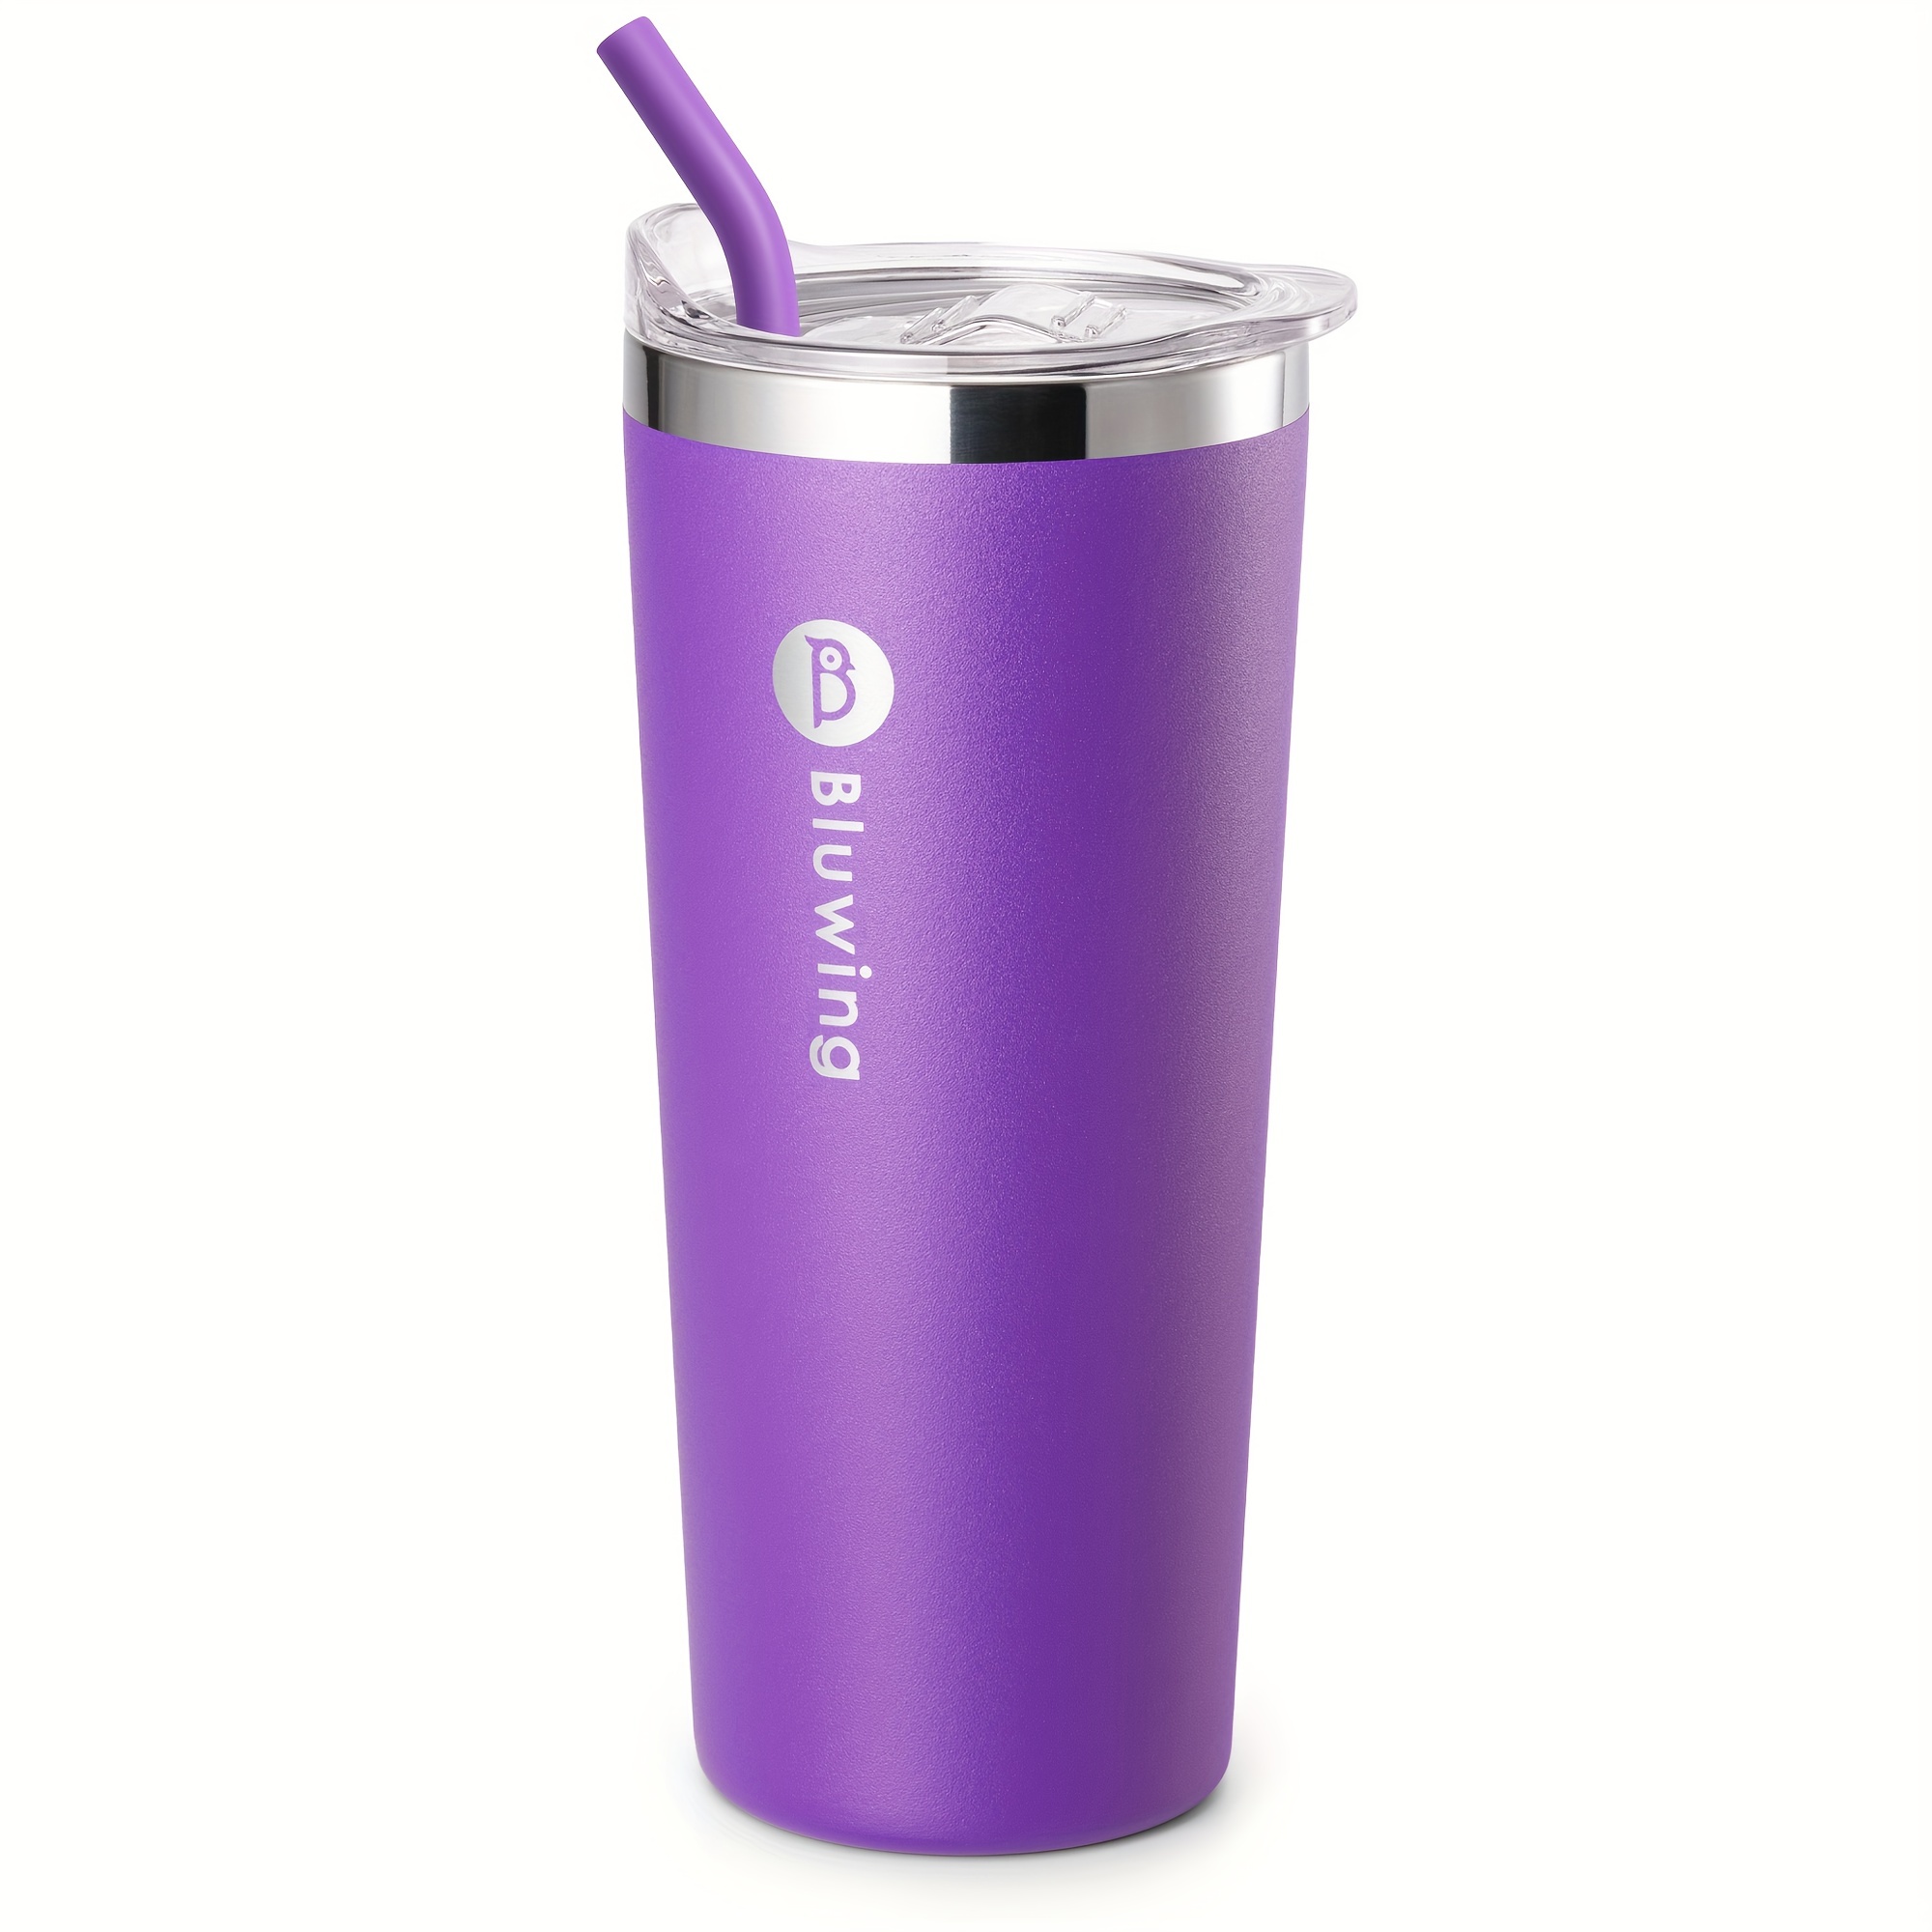 Baro double-drinking cup large capacity straw cup ice bar cup high  temperature tritan tea cup plum sandwich 1200ml 